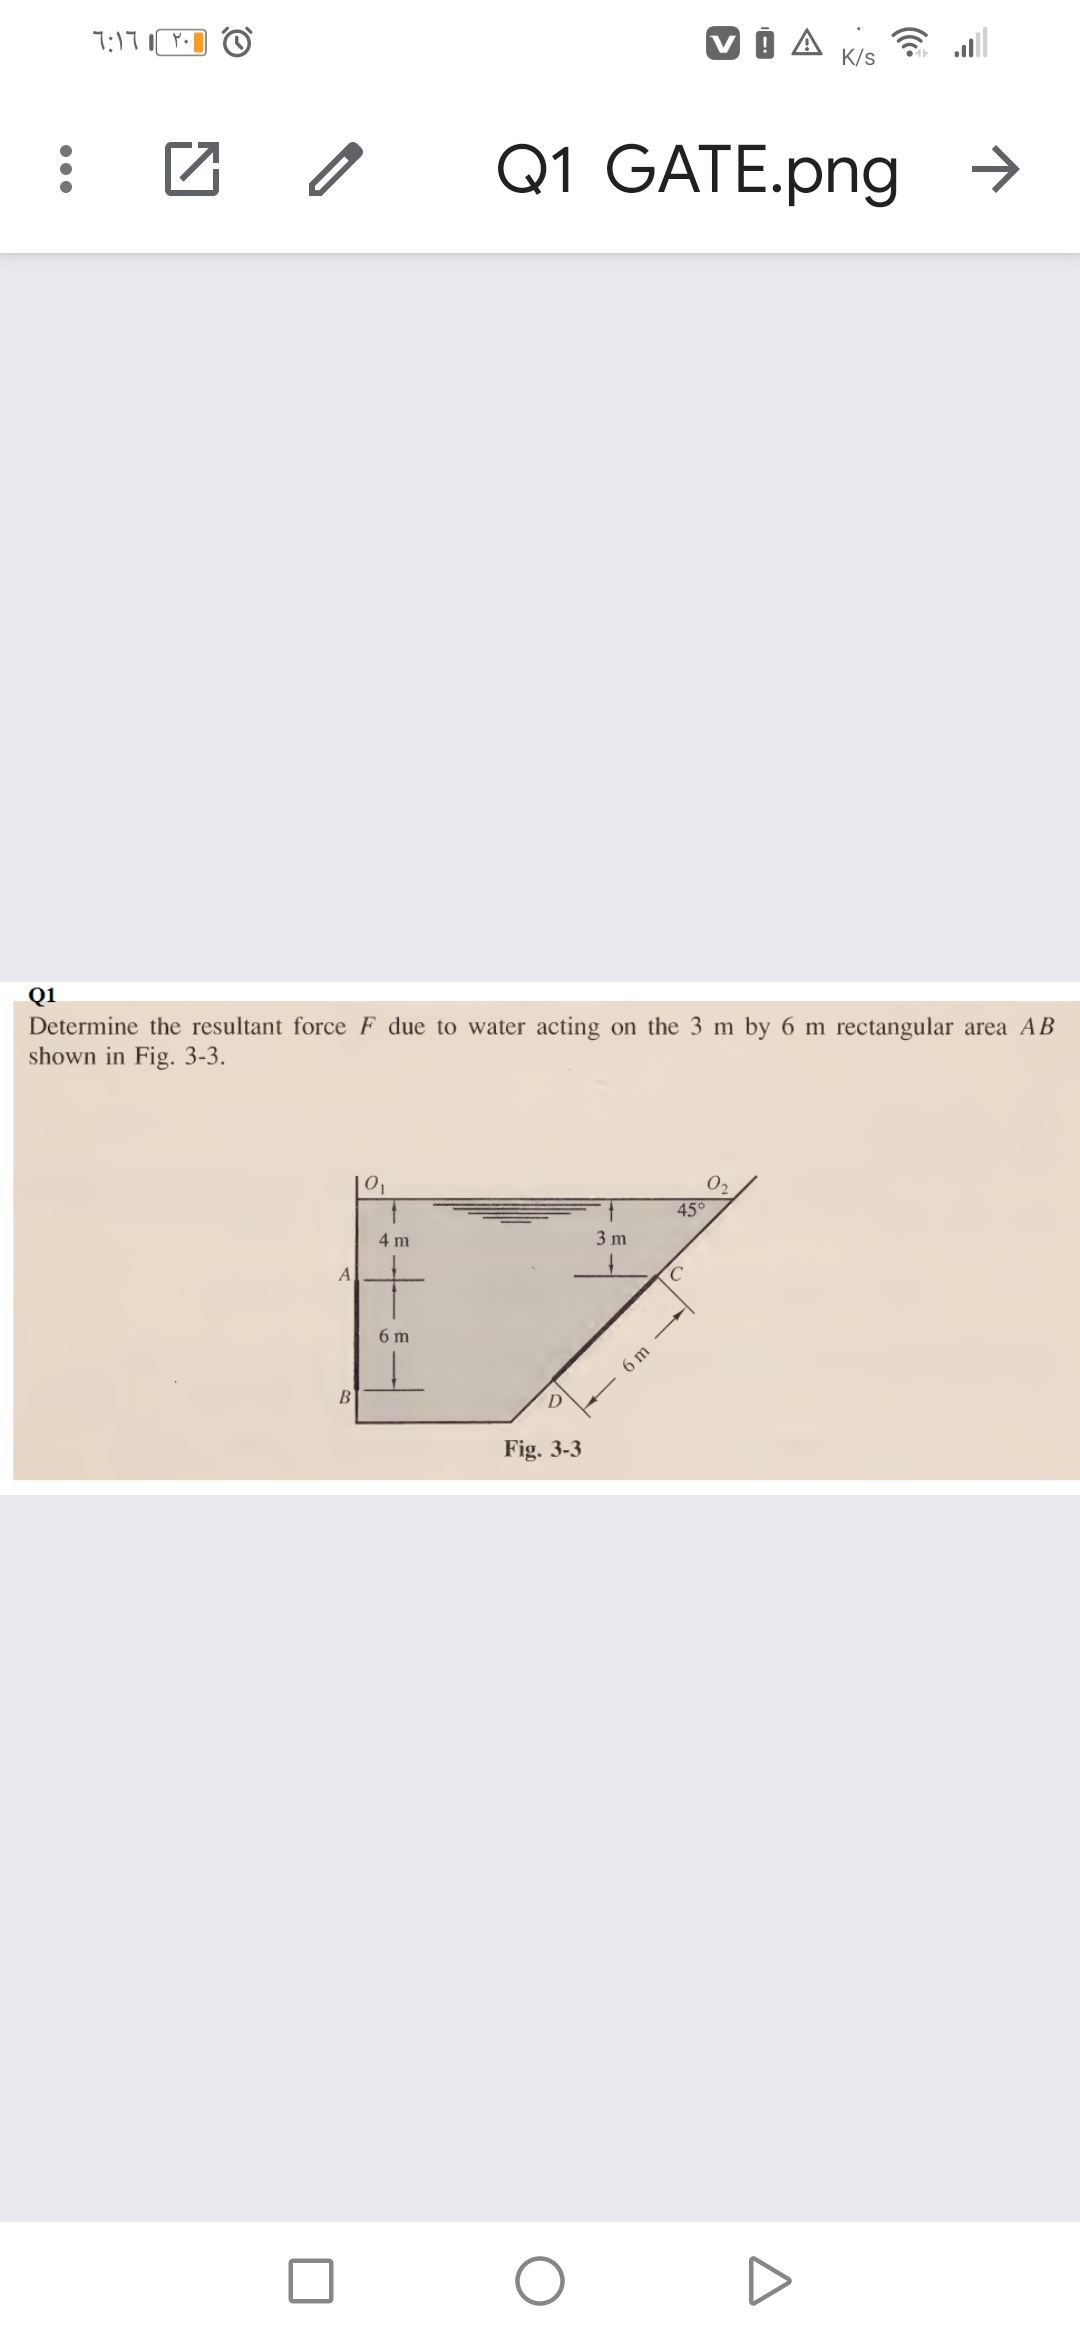 7:17
K/s
Q1 GATE.png →
Q1
Determine the resultant force F due to water acting on the 3 m by 6 m rectangular area AB
shown in Fig. 3-3.
|01
02
45°
4 m
3 m
A
6 m
6 m
B
Fig. 3-3
